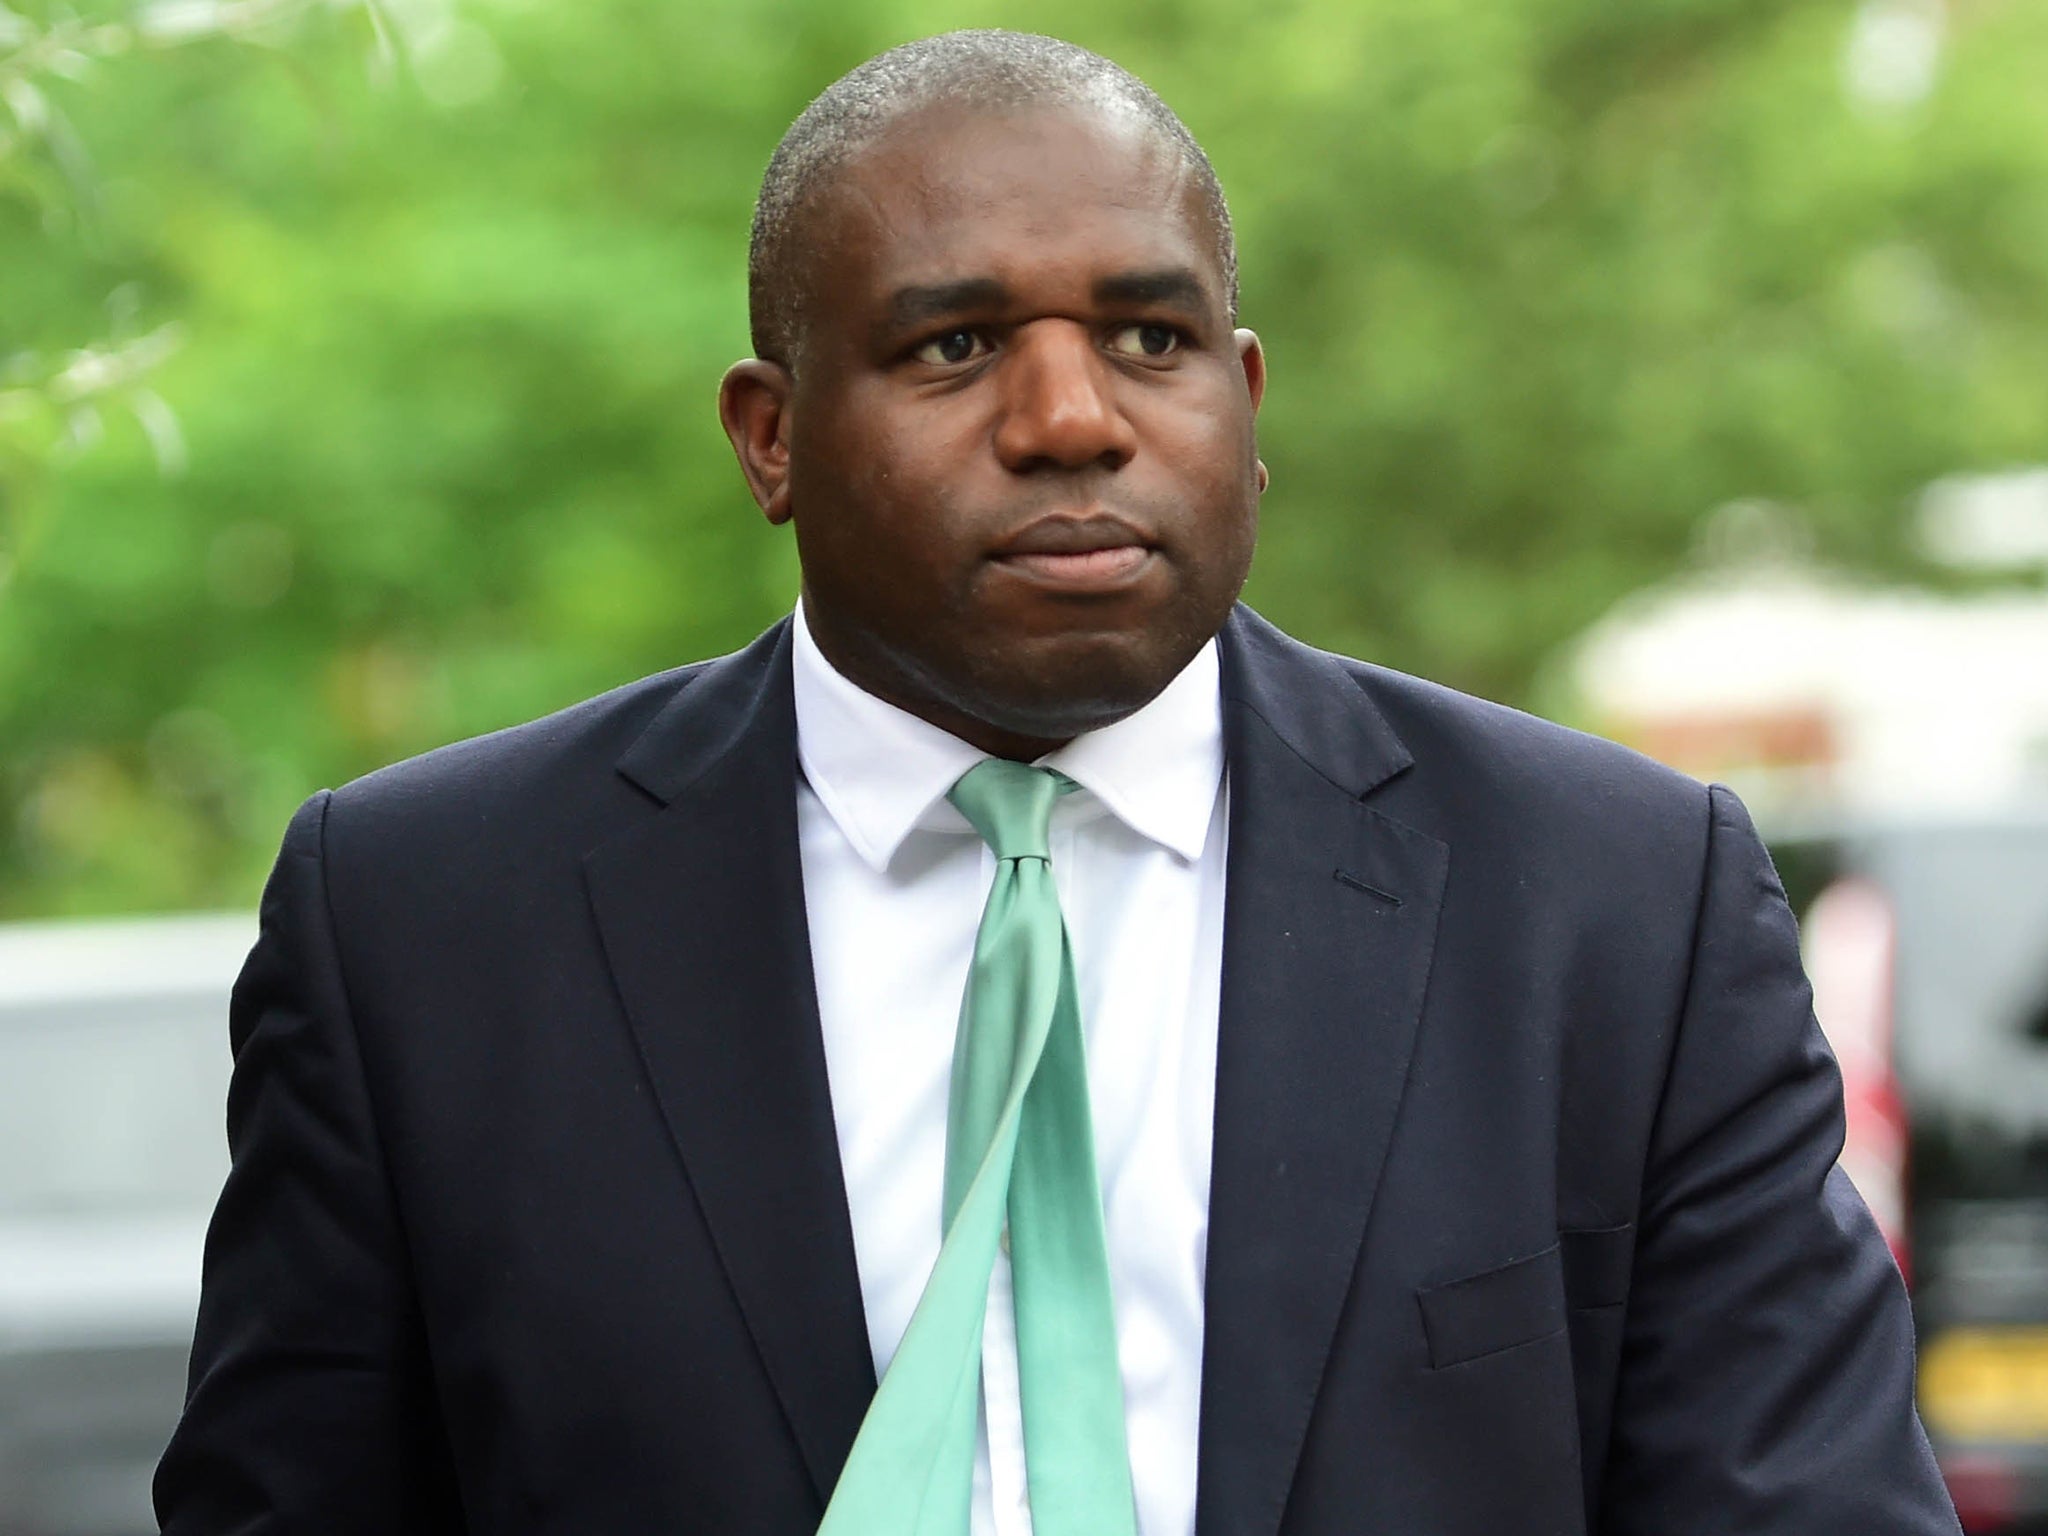 David Lammy, a leading supporter of the People’s Vote campaign